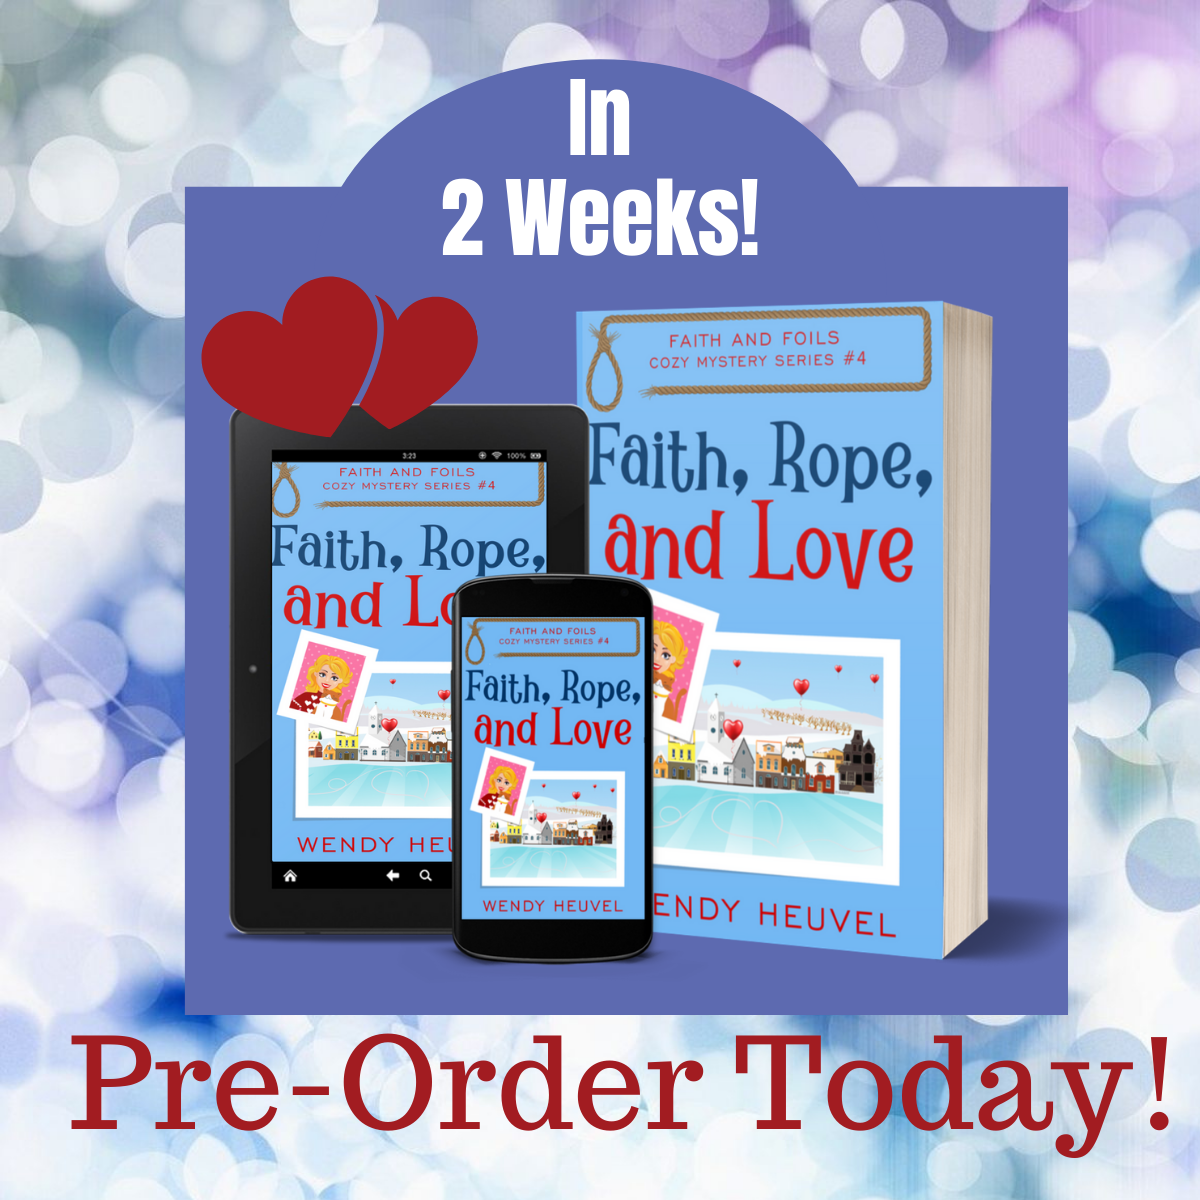 Faith, Rope, and Love Release in Two Weeks!